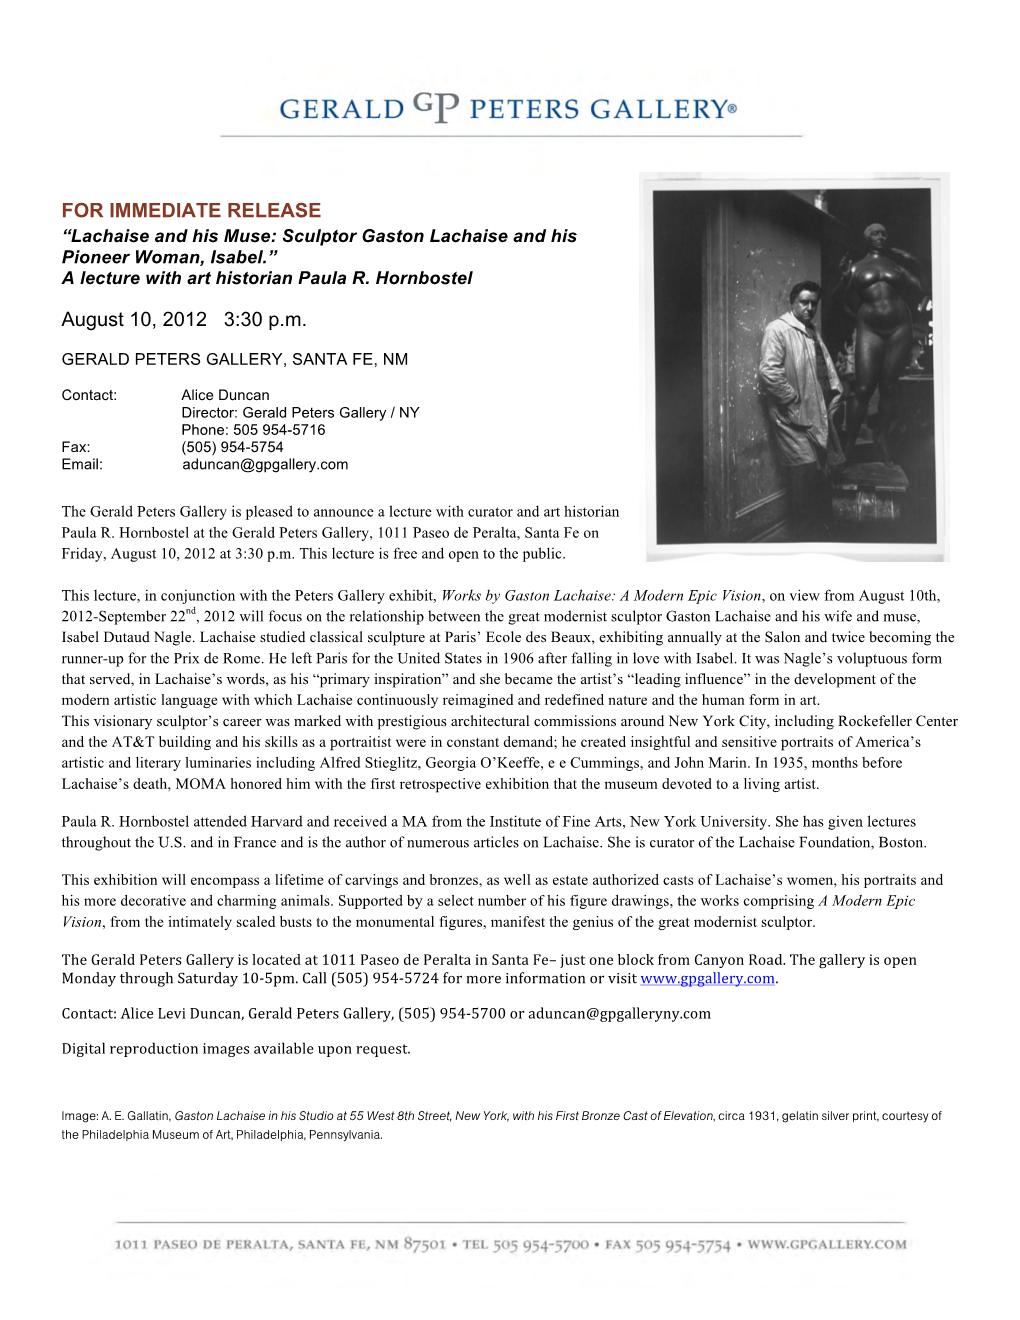 1 for IMMEDIATE RELEASE August 10, 2012 3:30 P.M